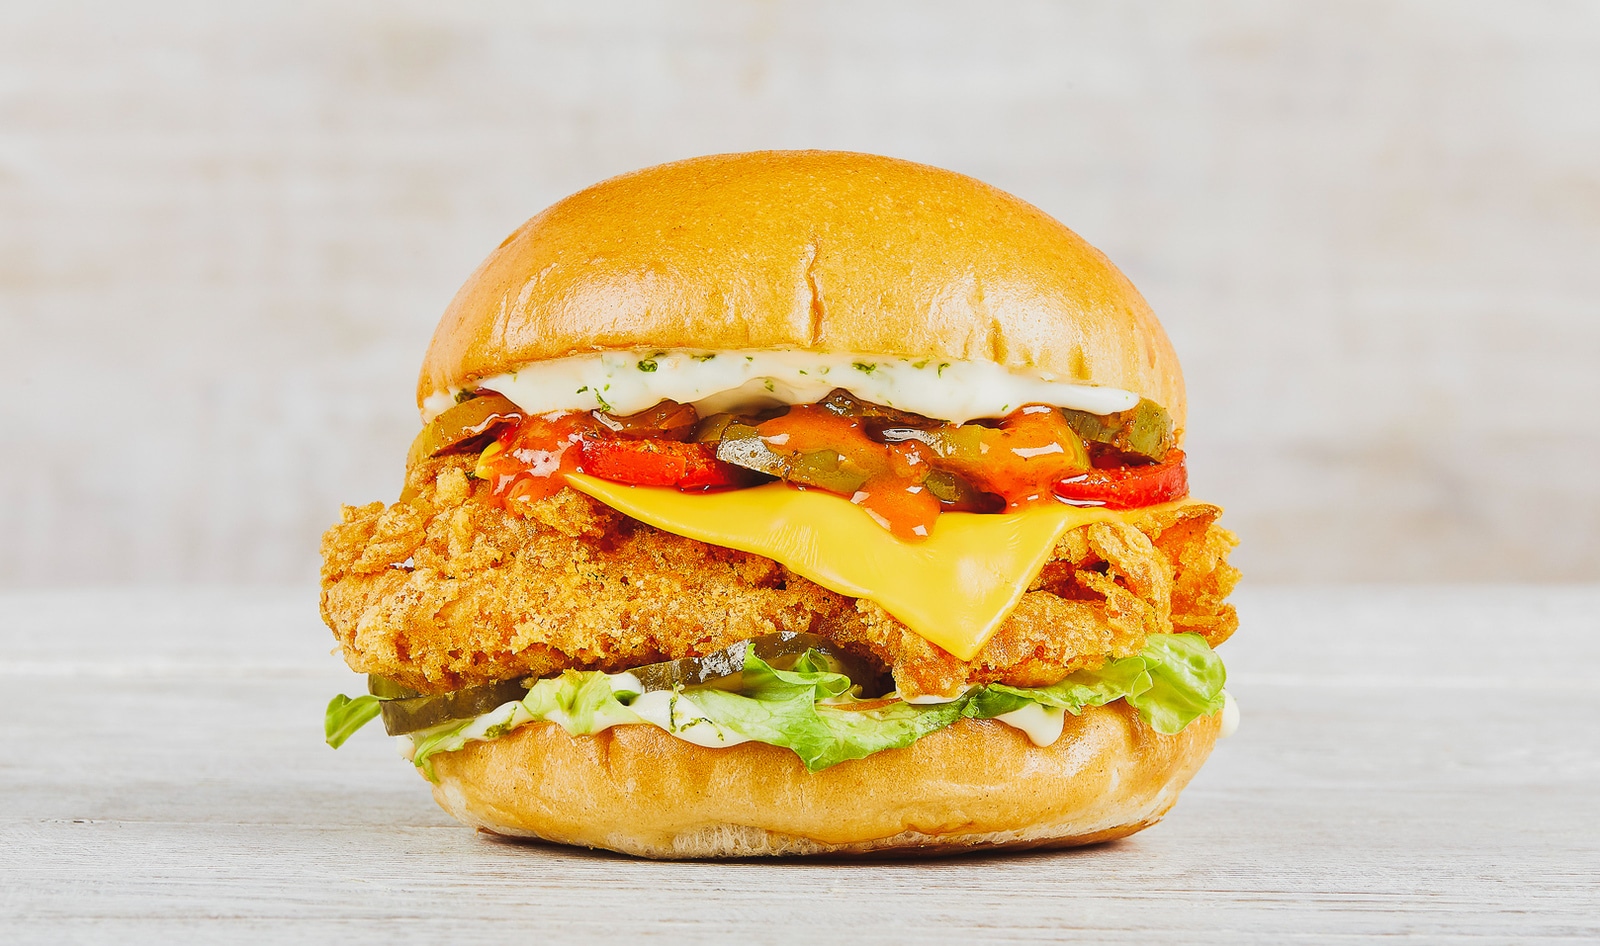 At This Cult-Favorite UK Chicken Shop, All 9 Main Dishes Can Be Made With Vegan Meat&nbsp;